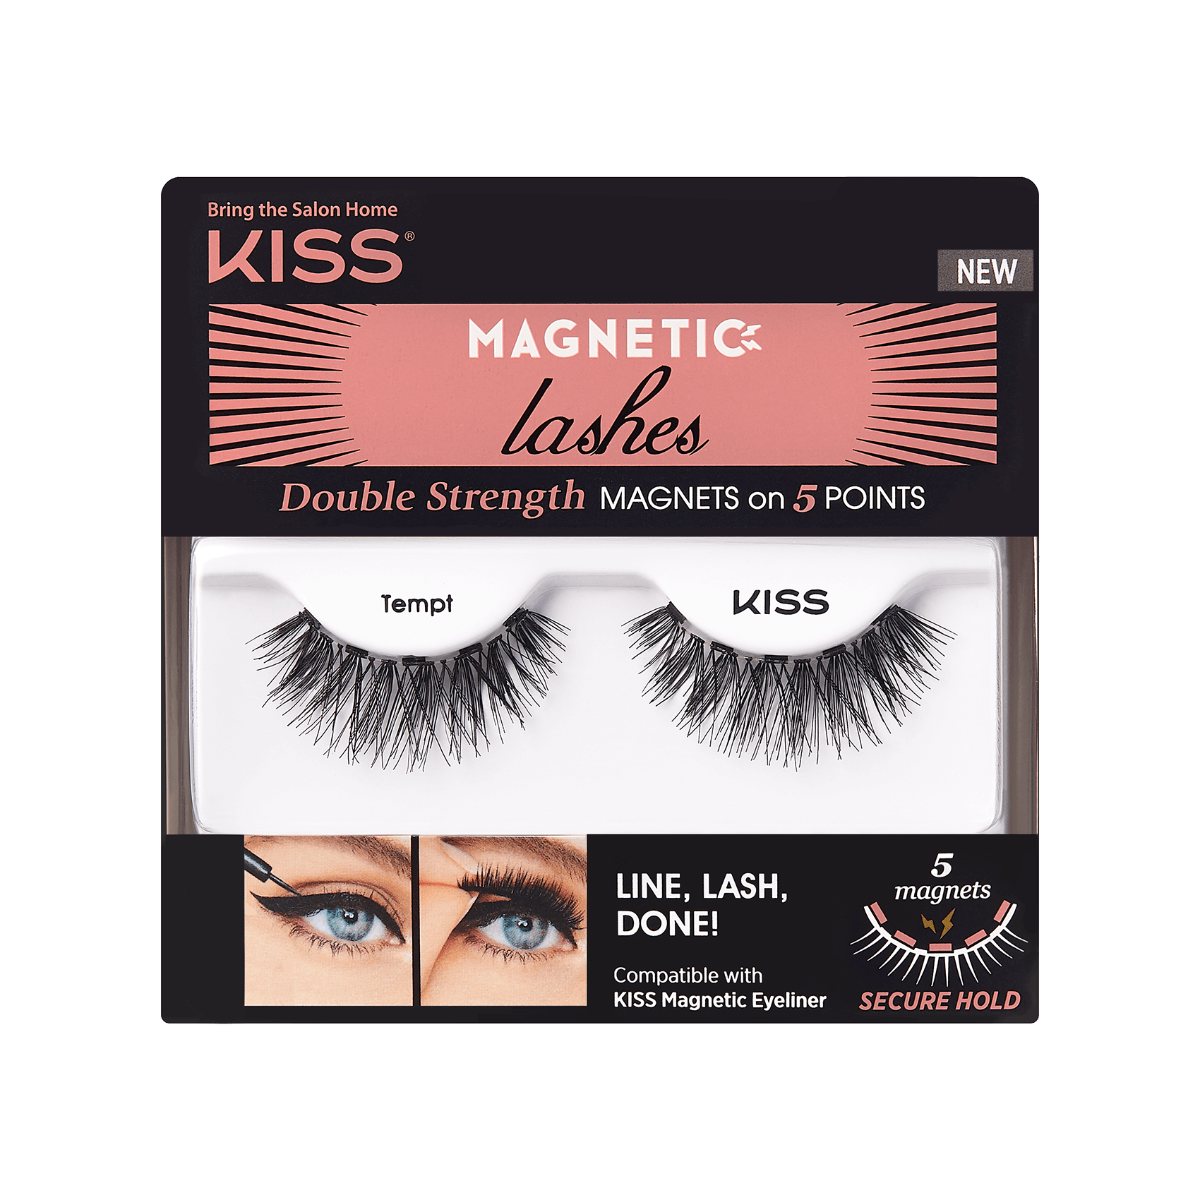 KISS Magnetic Lashes